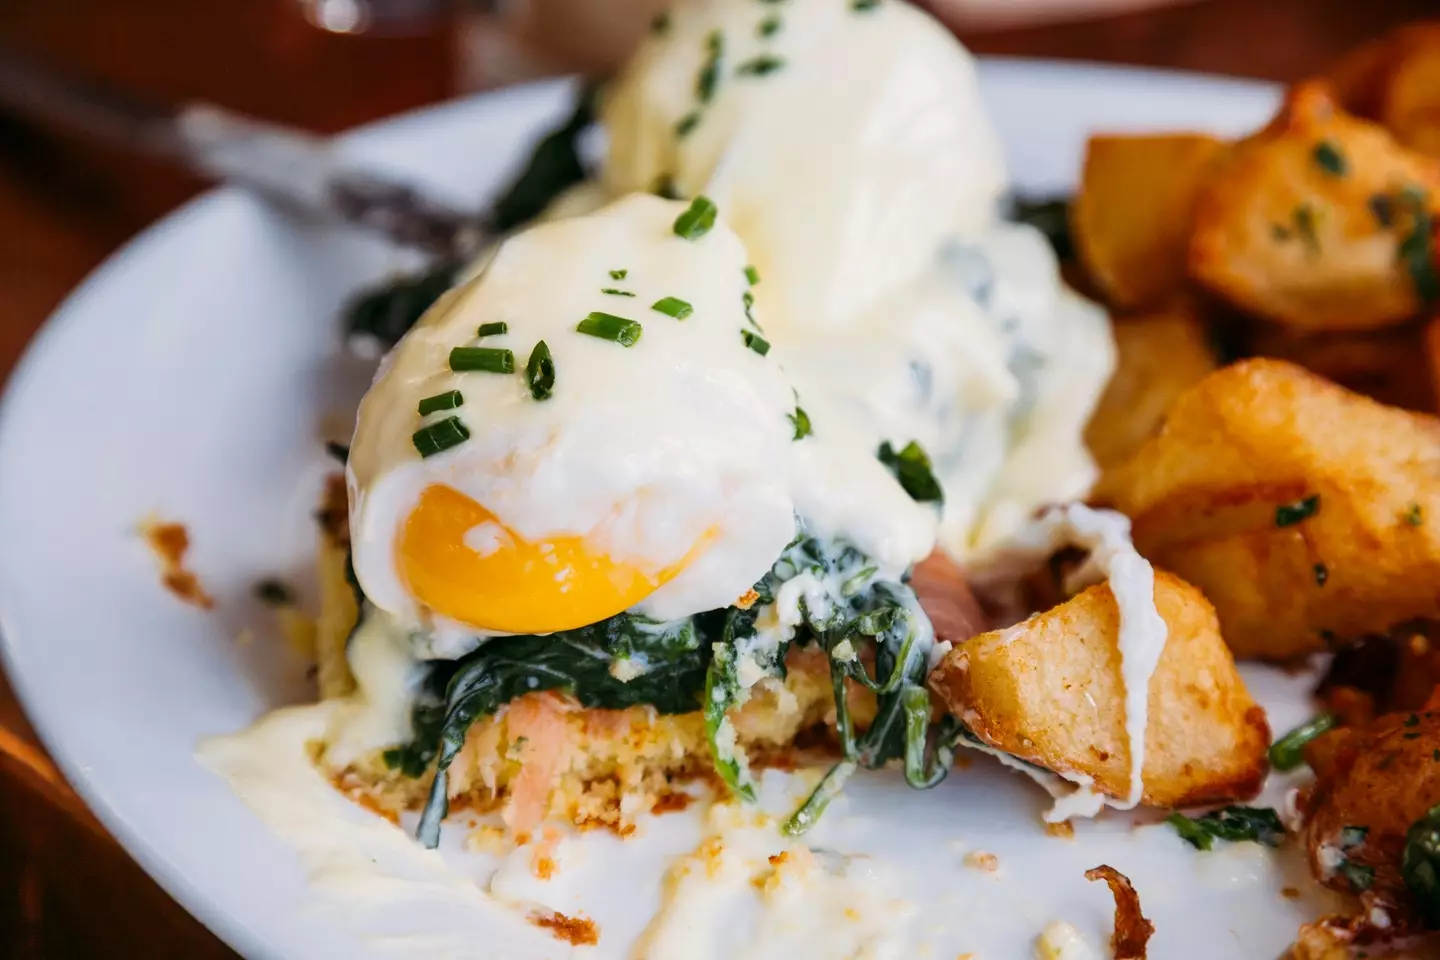 You can get one of your five-a-day with poached eggs on sourdough toast with spinach.